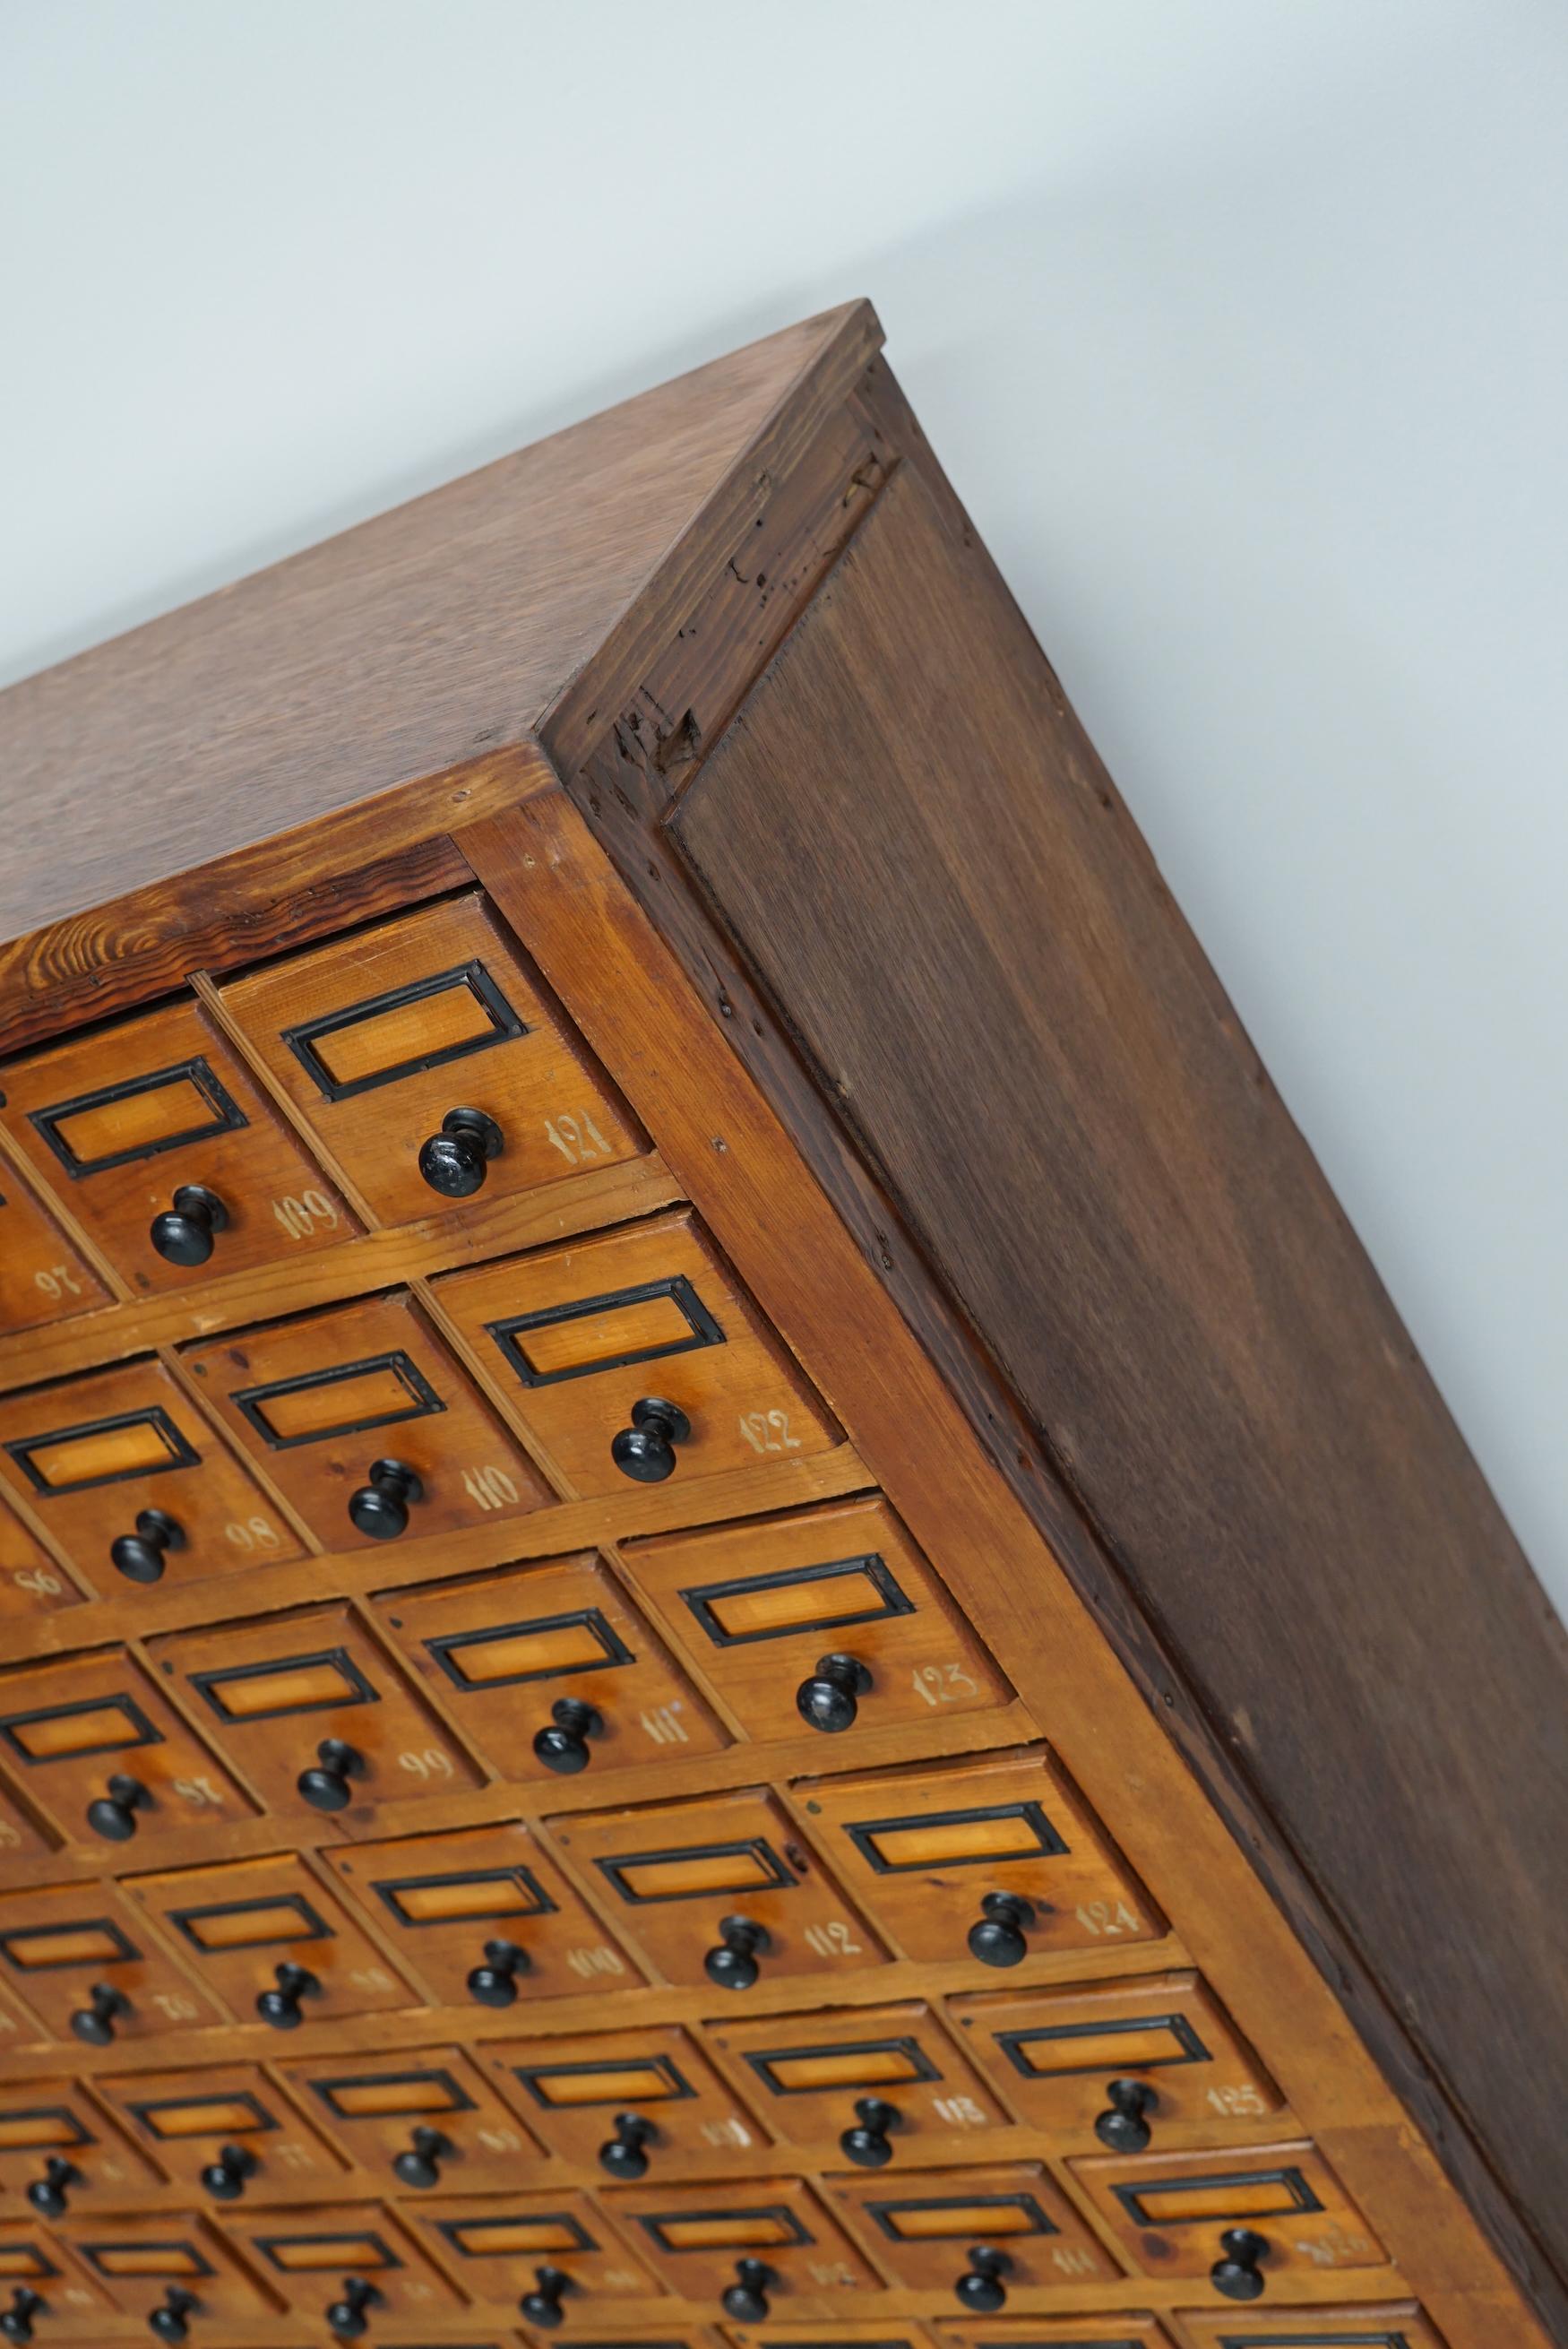 This workshop cabinet was made from pine in the Netherlands circa 1930s and it was used in a workshop for dentist equipment. It features many drawers with small knobs and name card holders. The interior dimensions of the drawers are: DWH 25 x 8 x 8,